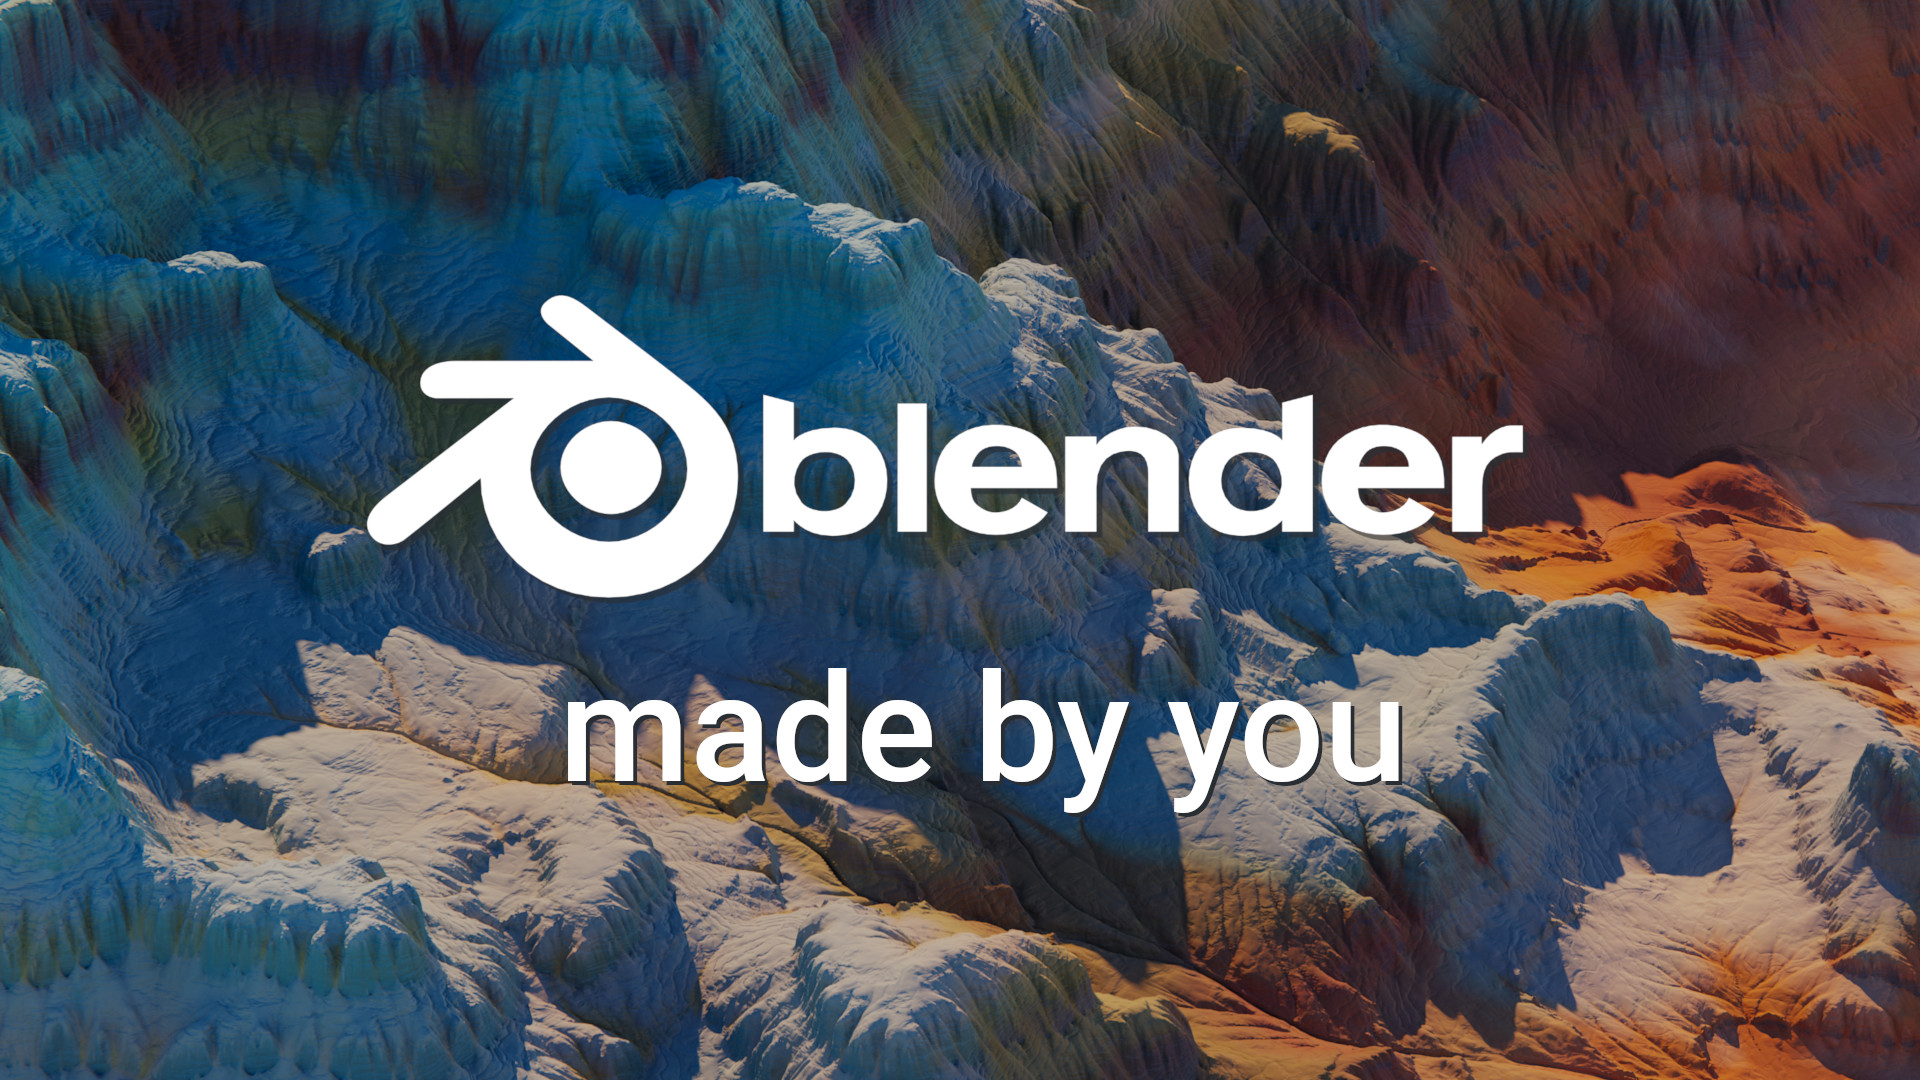 Blender, made by you